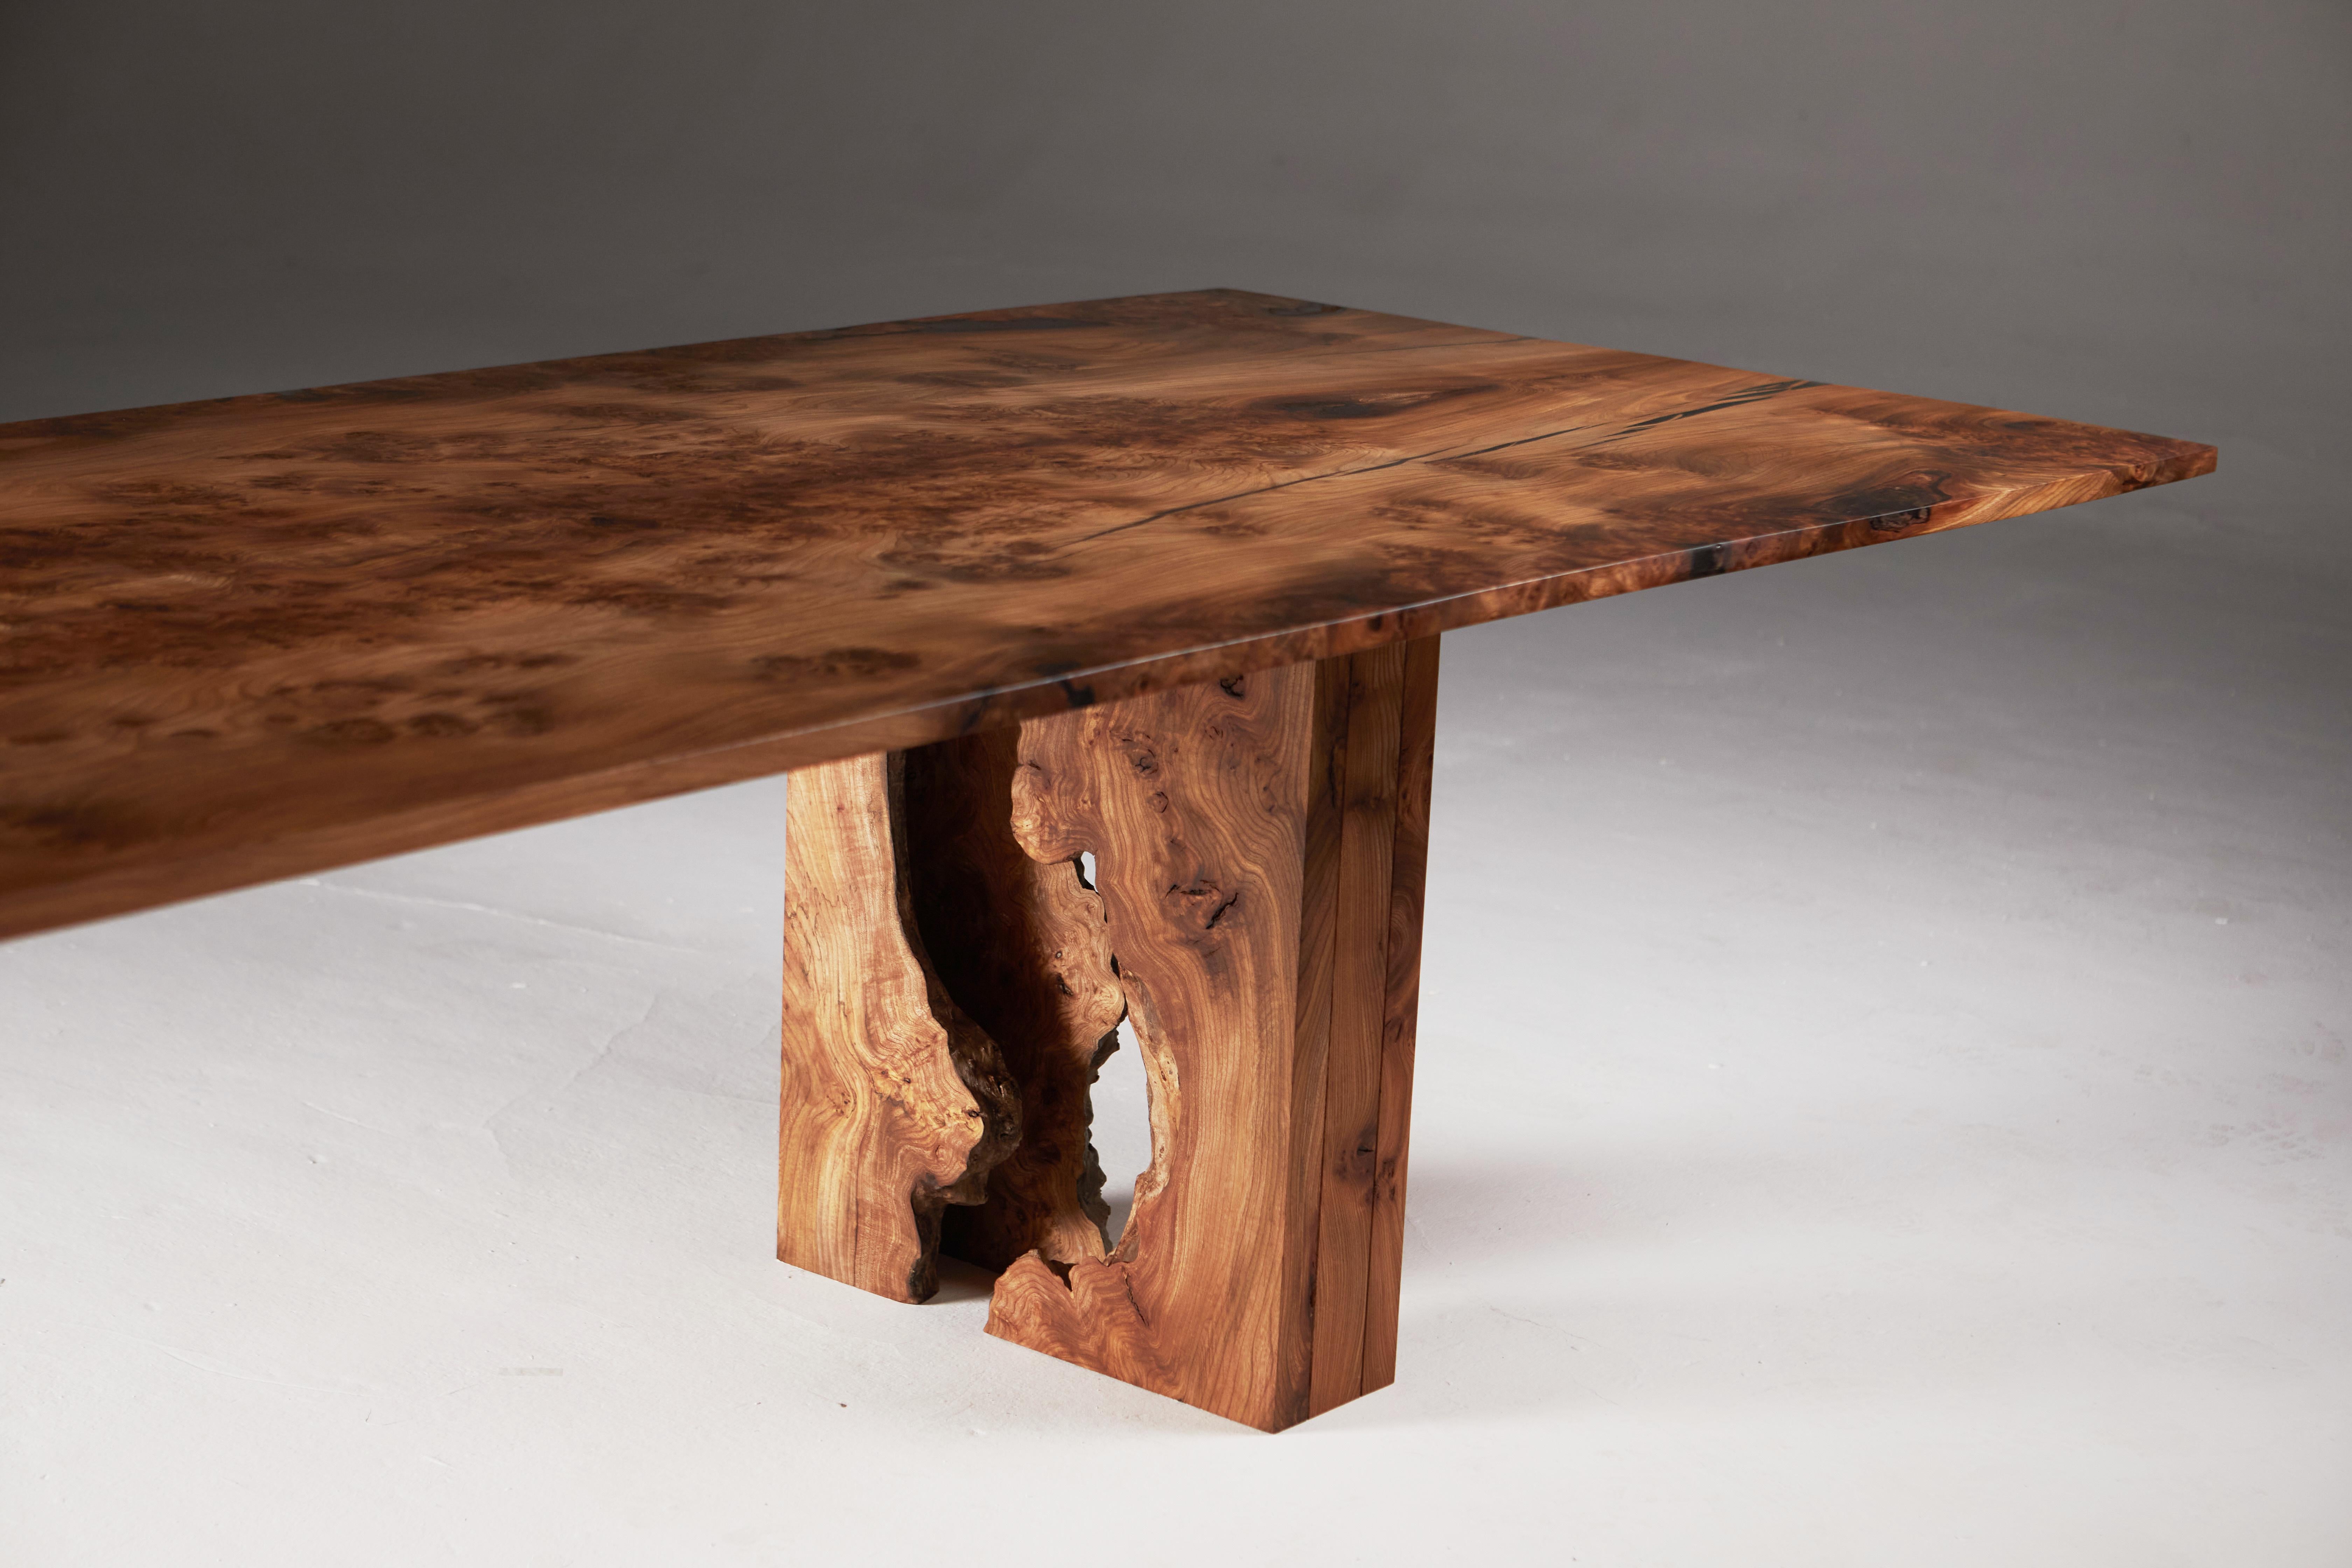 Scottish Burr Elm Table with Inverted Live Edge Legs and Book-matched Top.  9